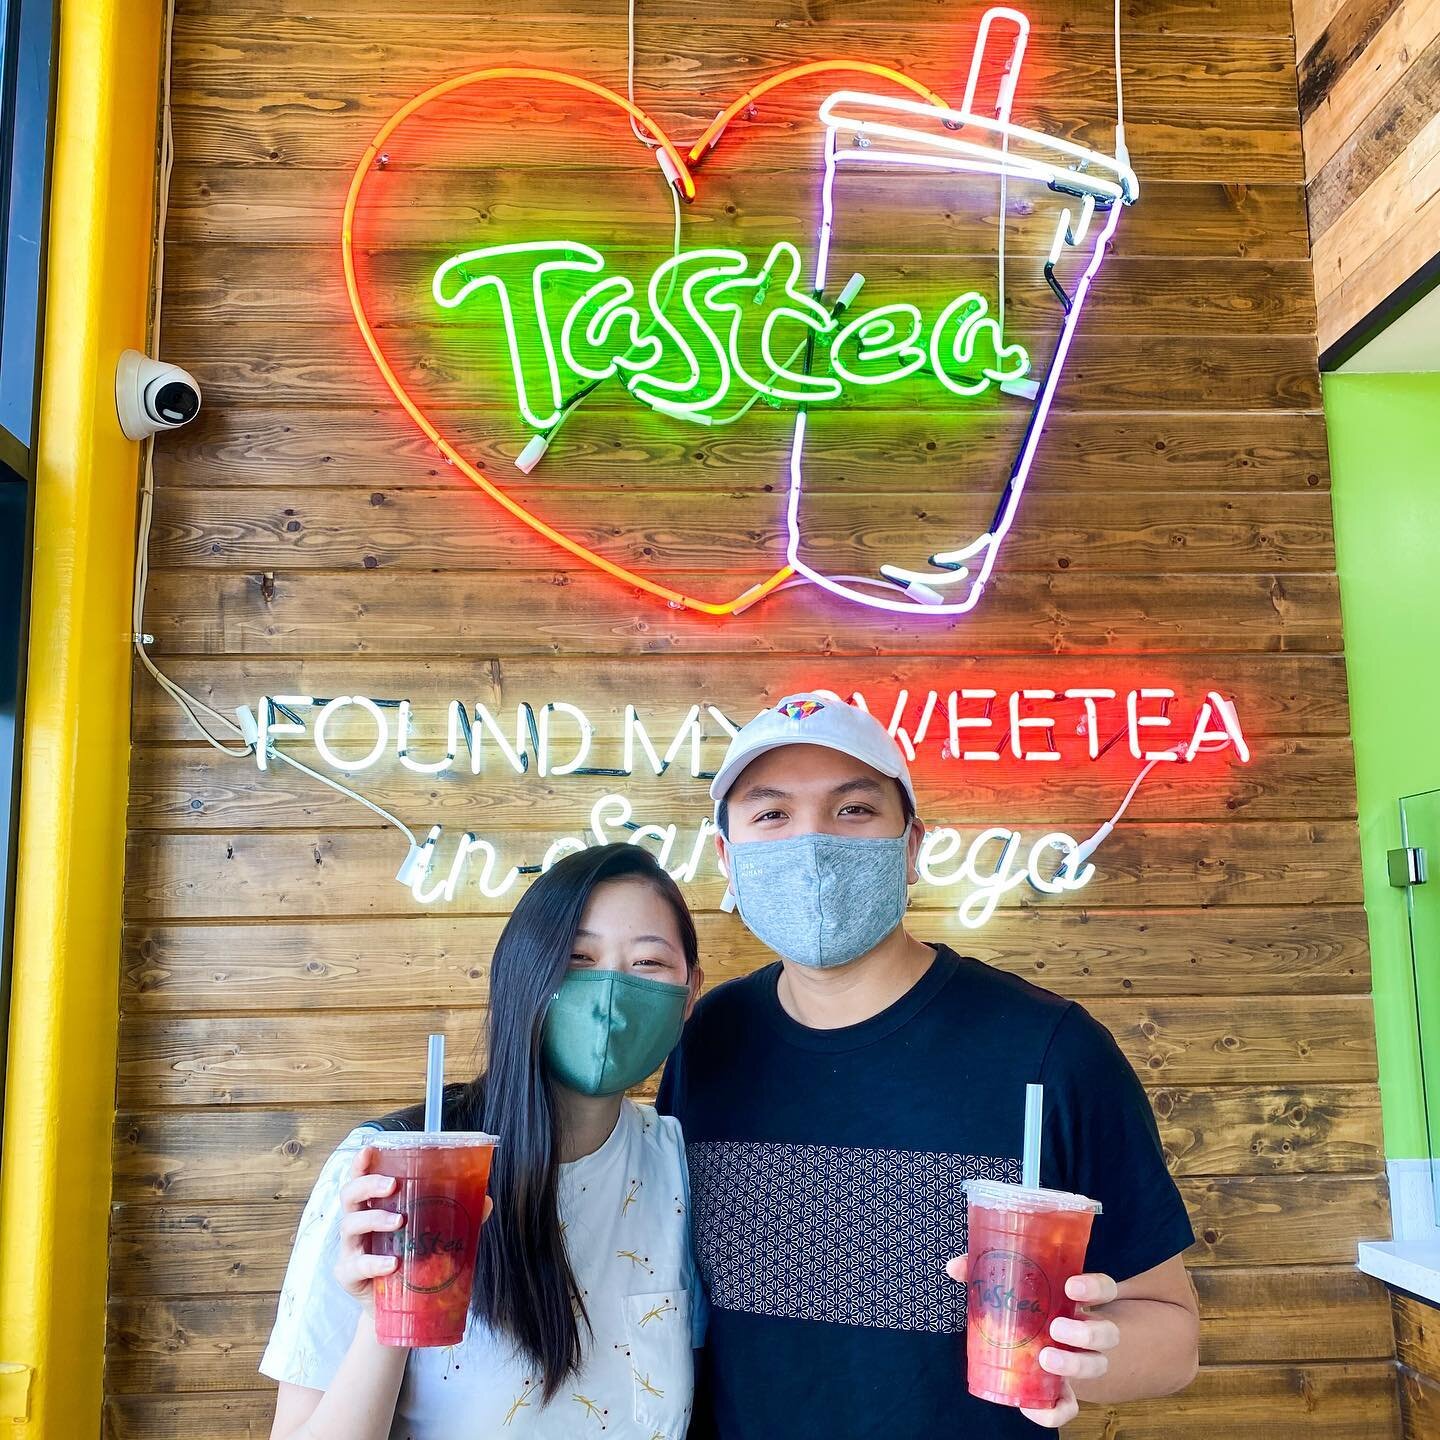 📍Tastea &bull; San Diego, CA

Peach Me Sweetea &bull; Karate Chicken

@drinktastea @tastea_miramesa is open in San Diego now!!! We know our SD friends have been supes excited (ahem @shef.chelle) so we had to go the first day 😅 Also got to meet up w